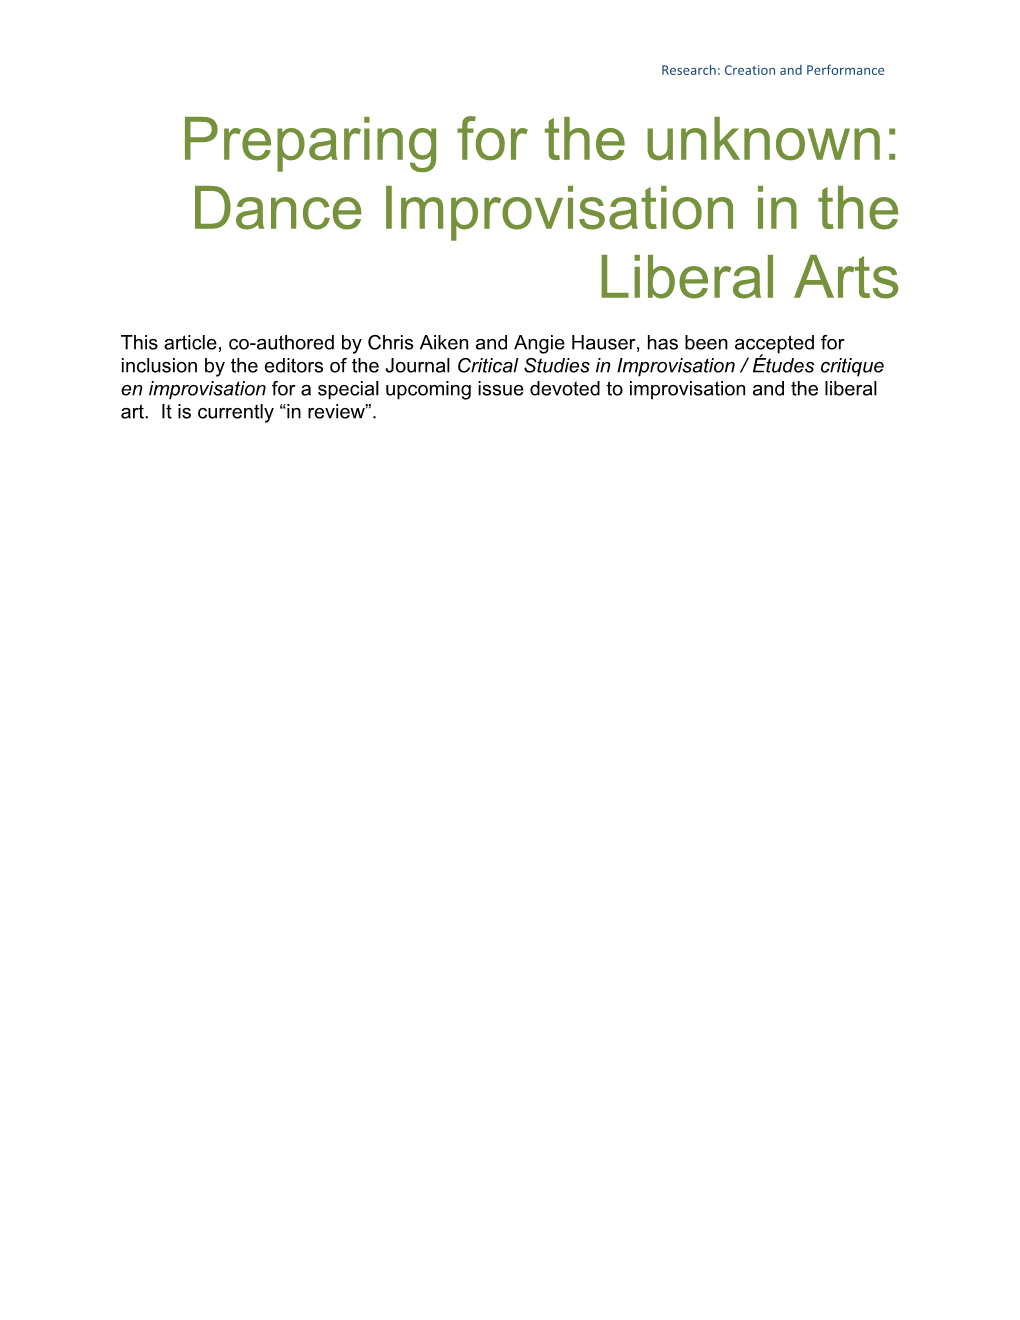 Preparing for the Unknown: Dance Improvisation in the Liberal Arts